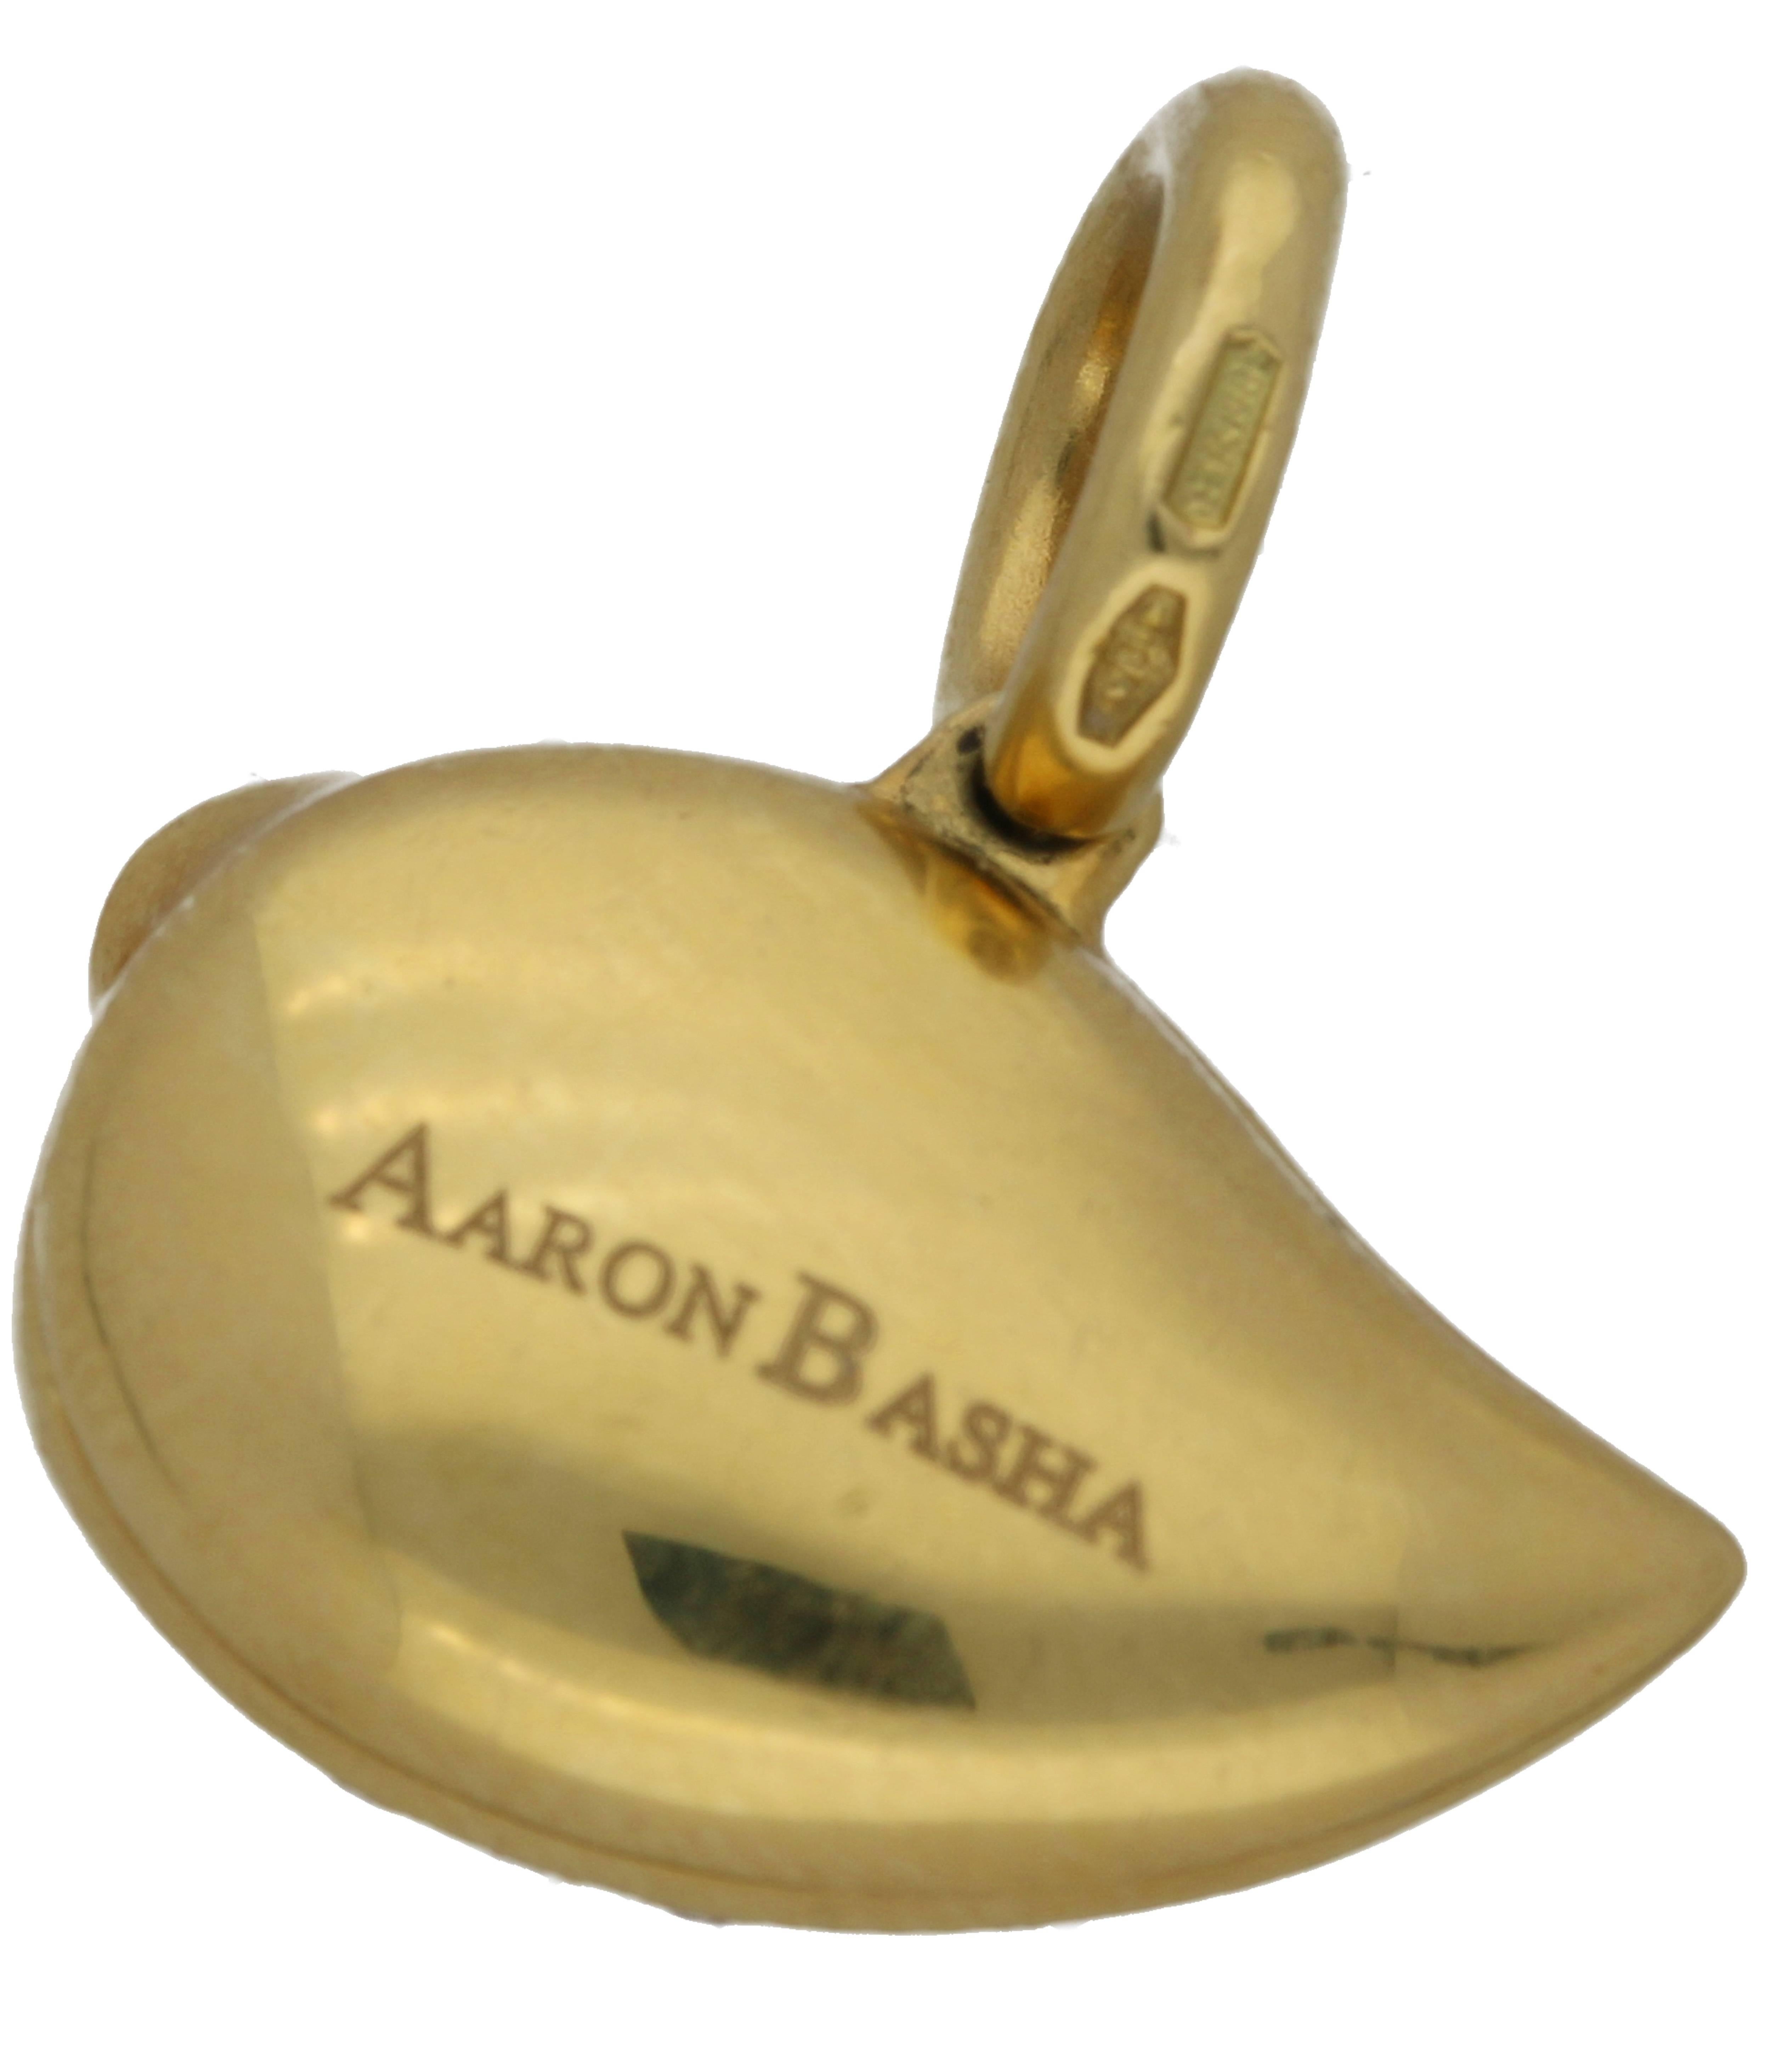 An 18ct yellow gold charm by the designer Aaron Basha, set with 21 round brilliant diamonds approx 0.03ct each with vibrant fine enamel work.